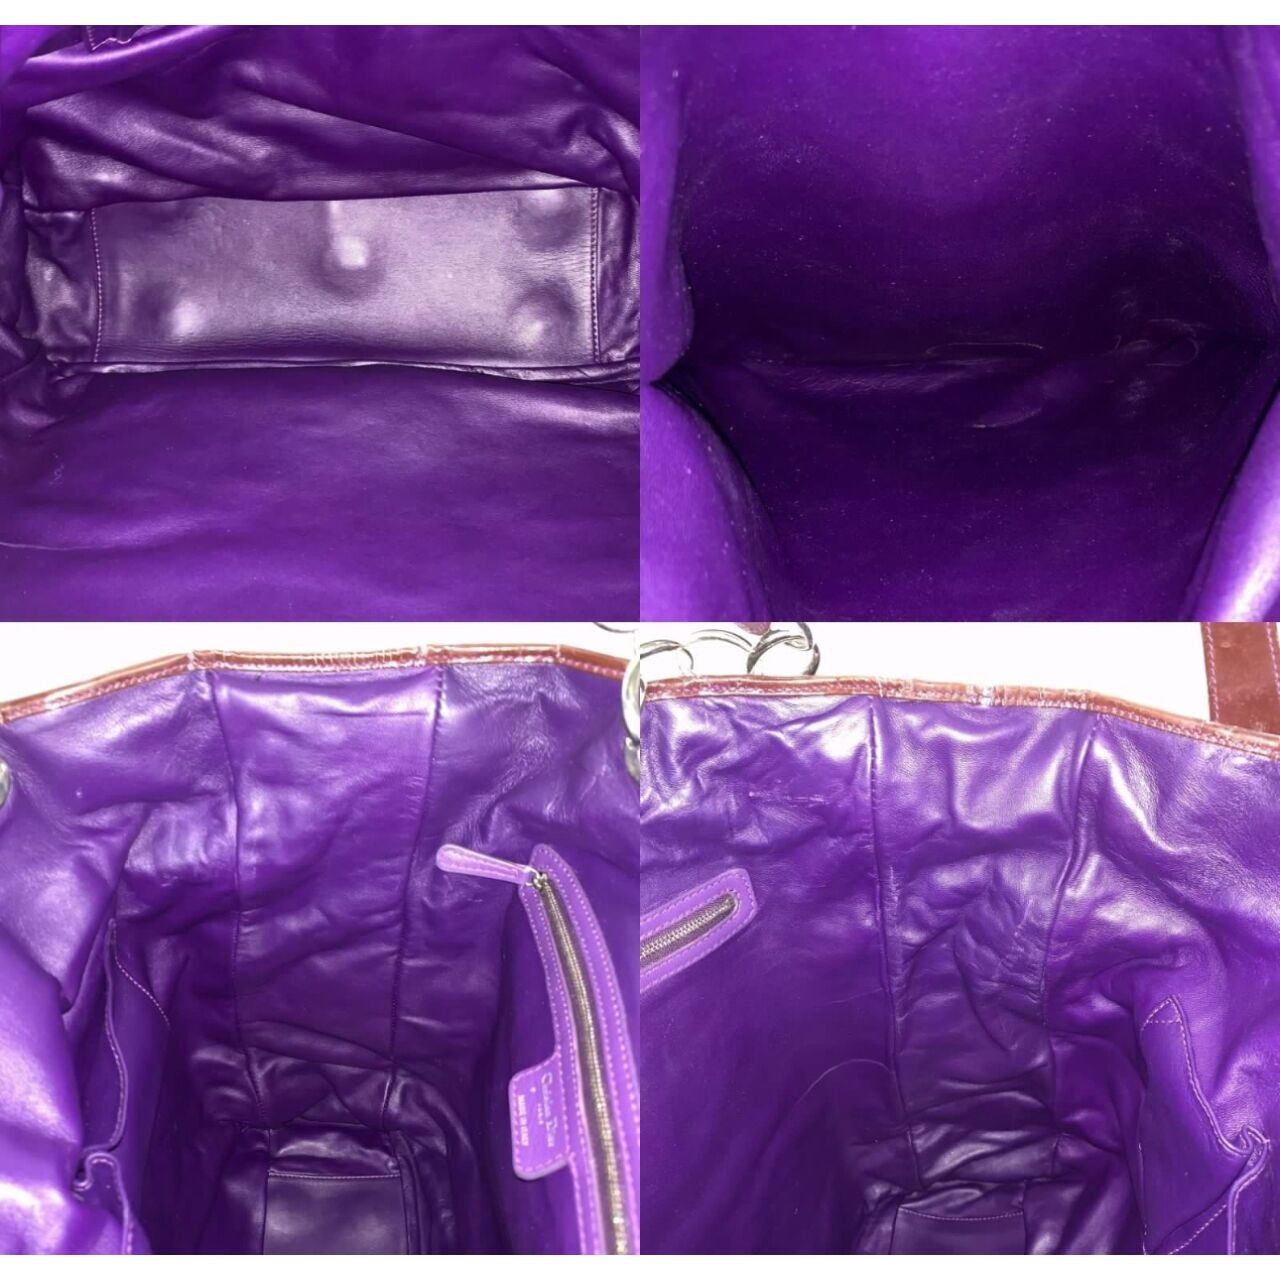 Christian Dior Cannage Purple Leather Weave Tote Bag